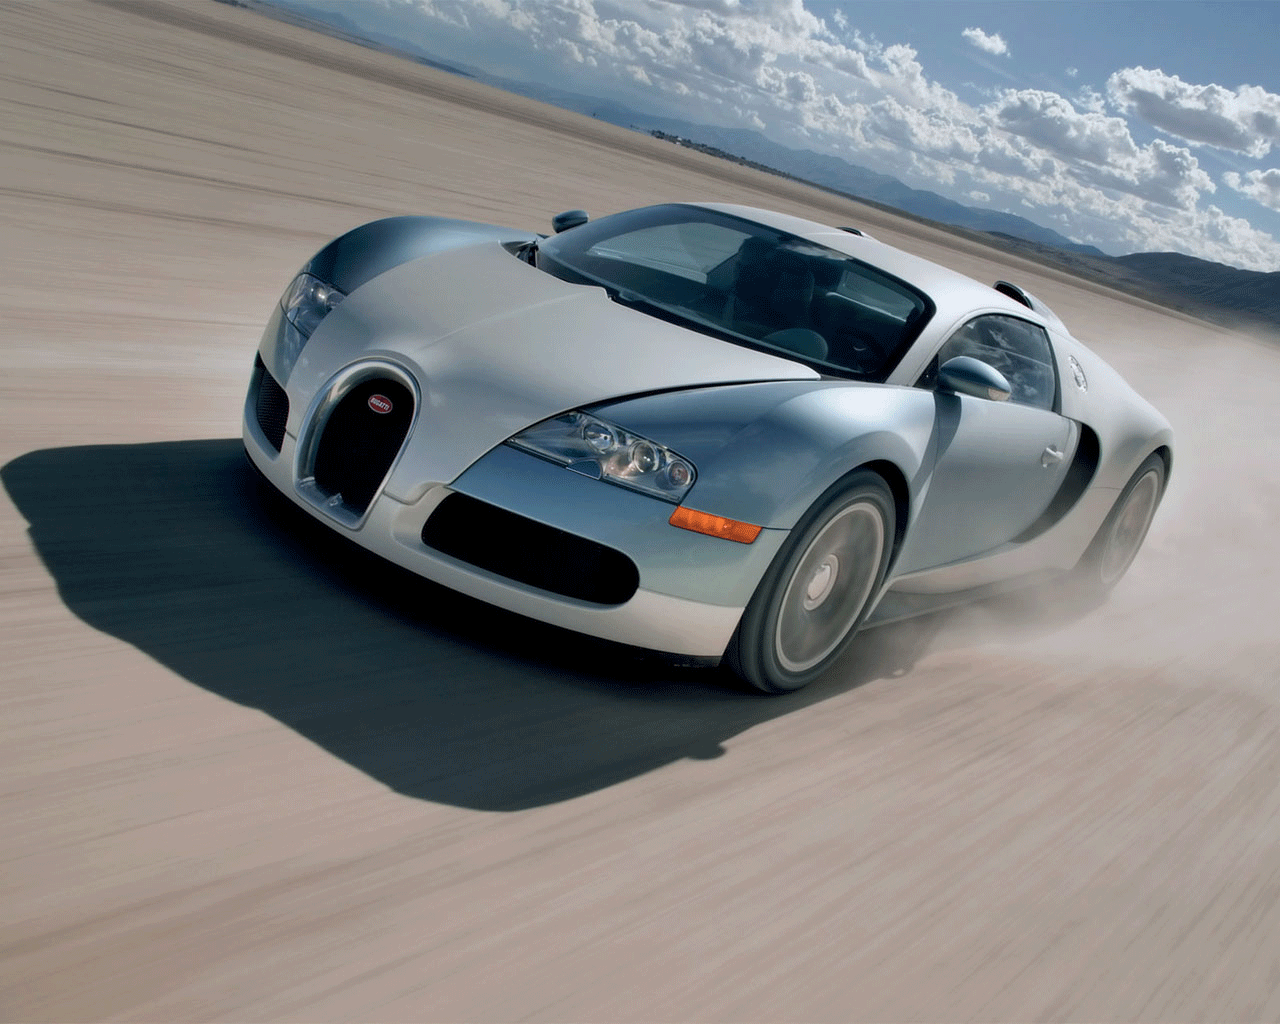 Texas man accused of drowning Bugatti Sports Car for Insurance